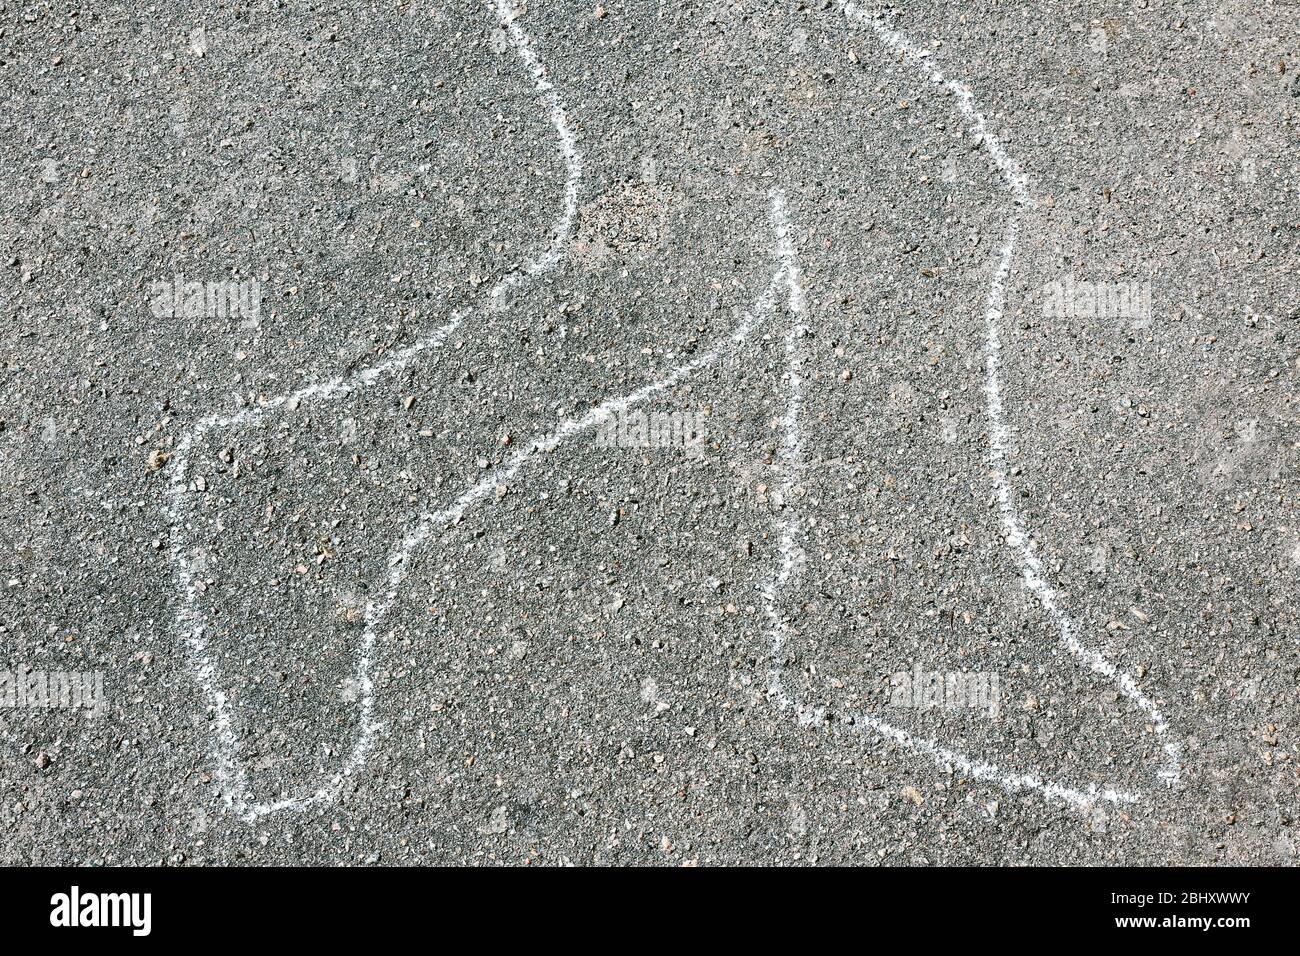 Chalk outline of body dead on pavement Stock Photo